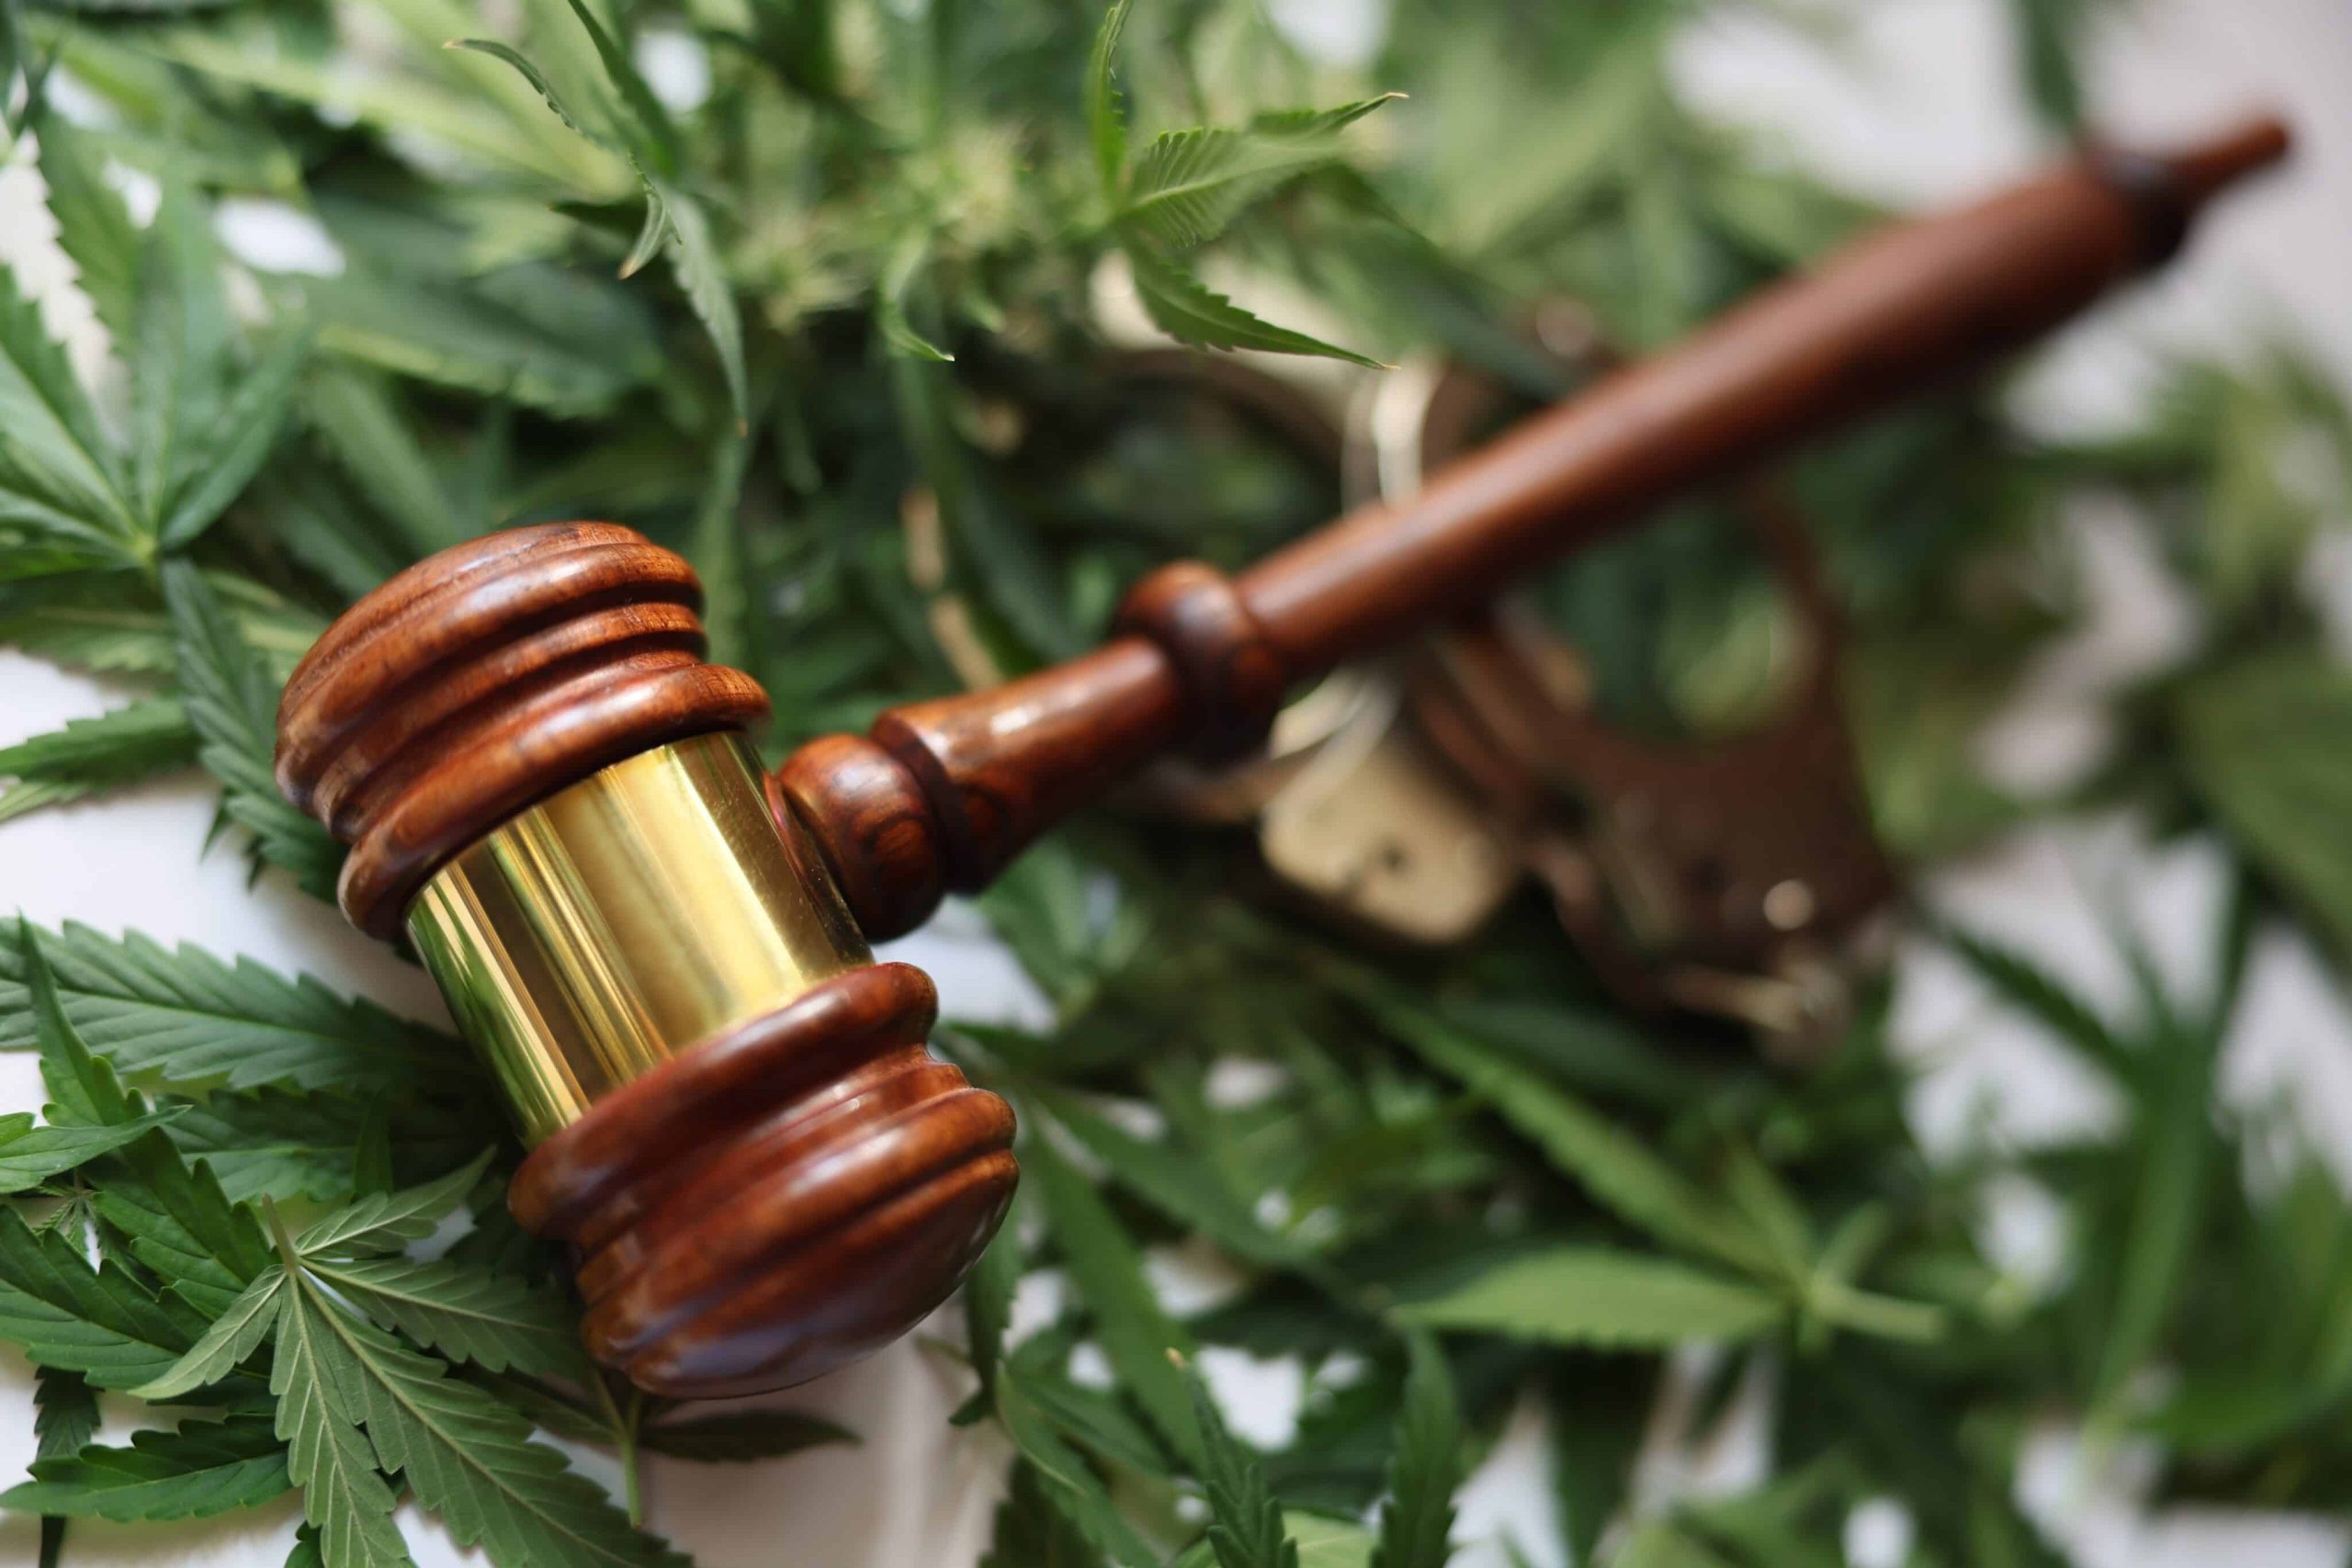 House Lawmakers Reintroduce Bipartisan Cannabis Expungement Bill